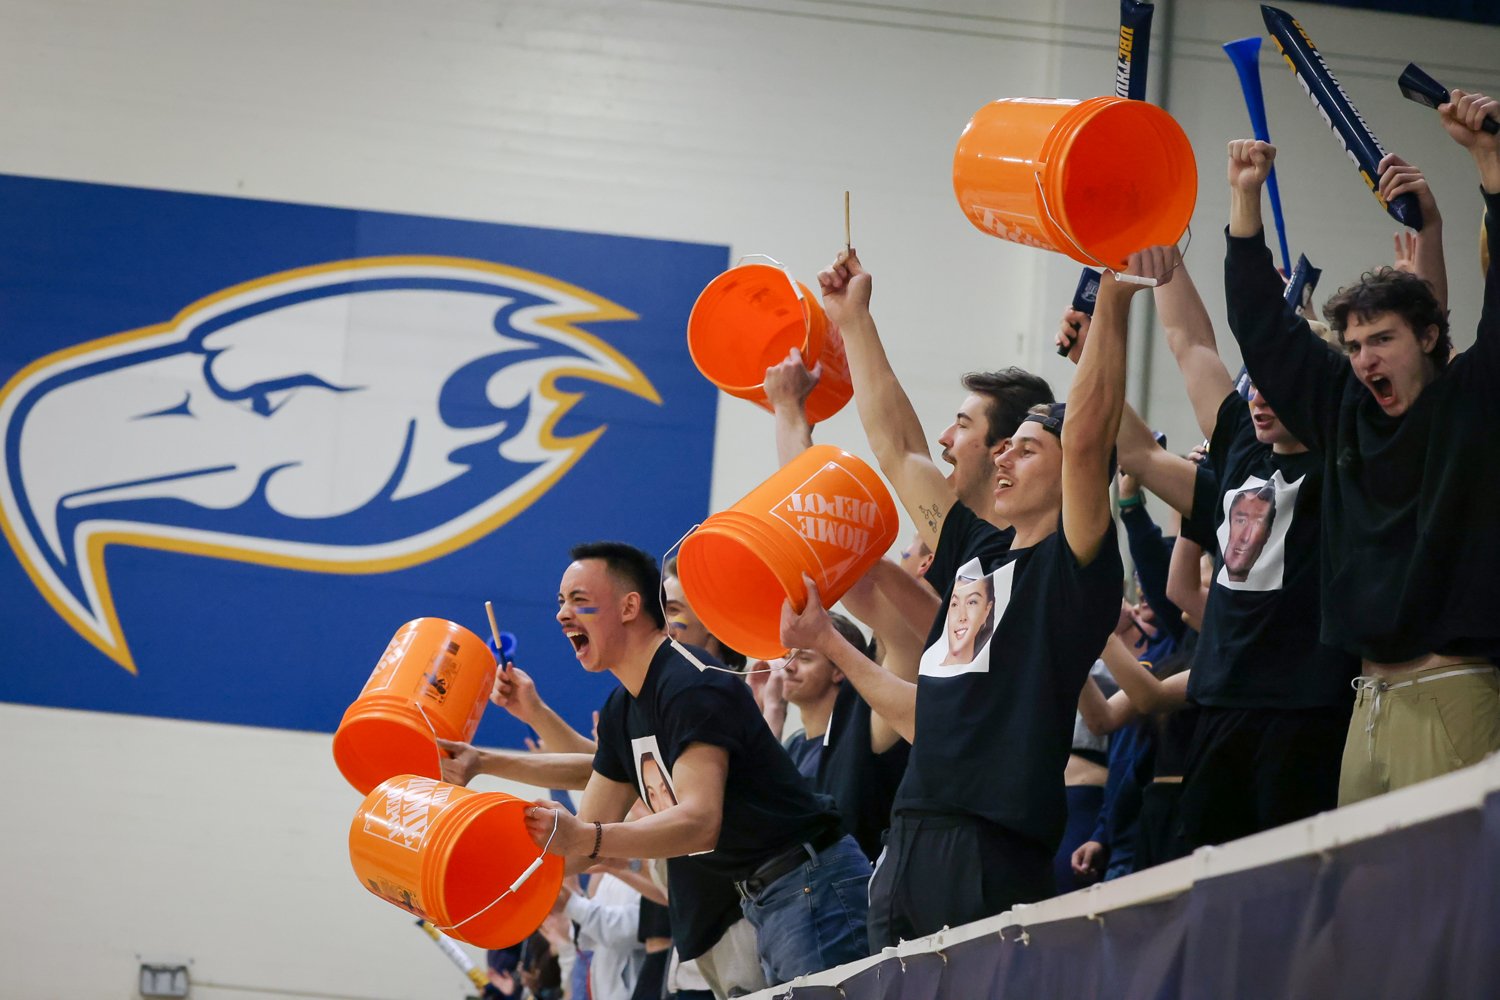 T-Birds fans led by men's volleyball players Coltyn Liu and Matt Neaves show their support for the women's team.